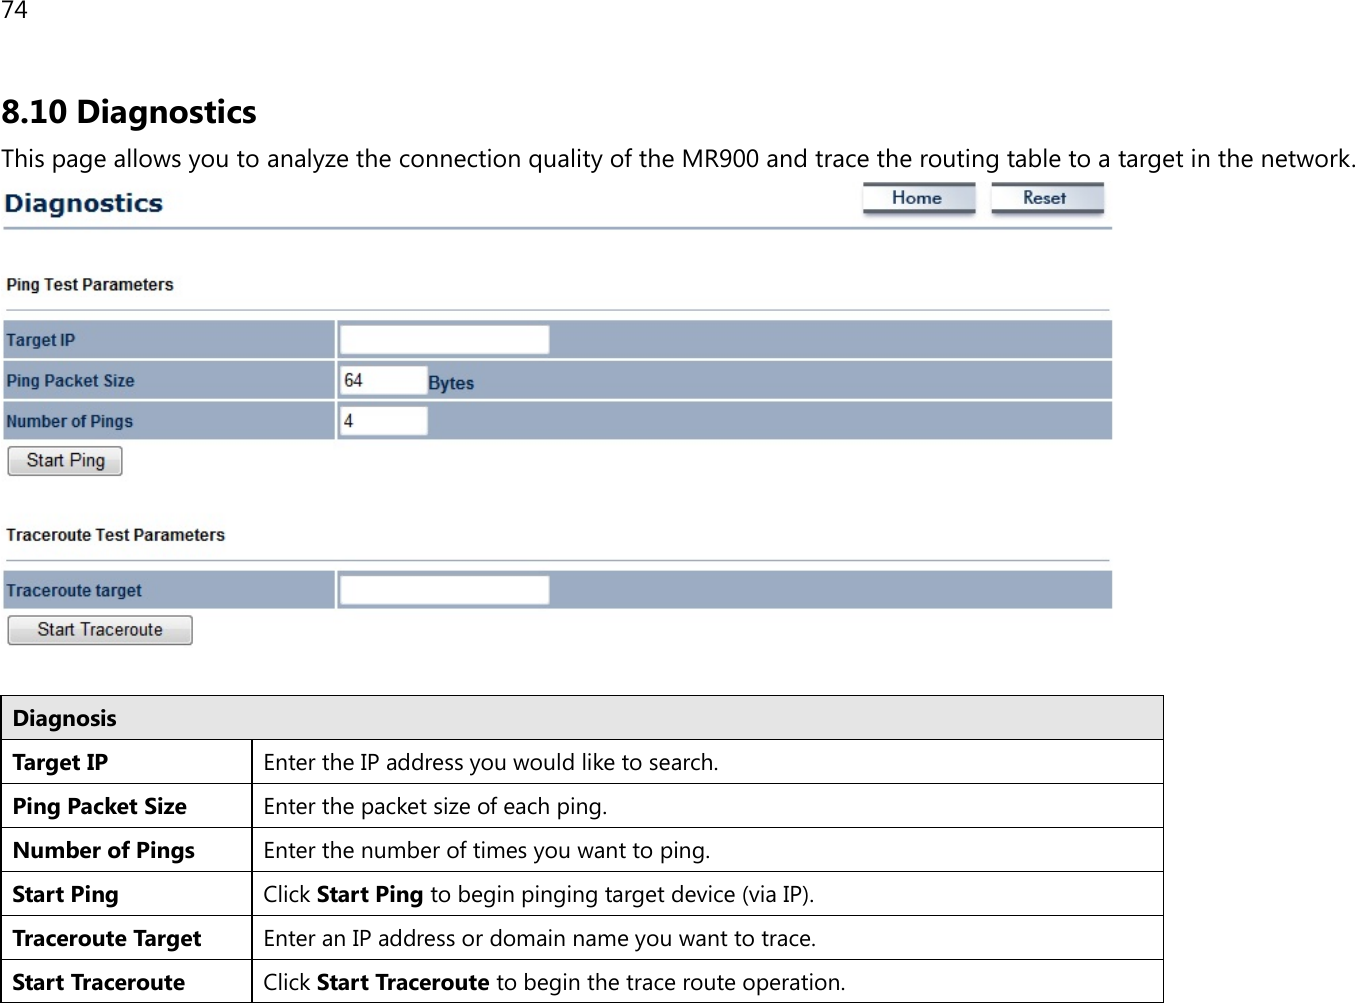 74 8.10 Diagnostics This page allows you to analyze the connection quality of the MR900 and trace the routing table to a target in the network.   Diagnosis Target IP Enter the IP address you would like to search. Ping Packet Size Enter the packet size of each ping. Number of Pings Enter the number of times you want to ping. Start Ping Click Start Ping to begin pinging target device (via IP). Traceroute Target Enter an IP address or domain name you want to trace. Start Traceroute Click Start Traceroute to begin the trace route operation. 